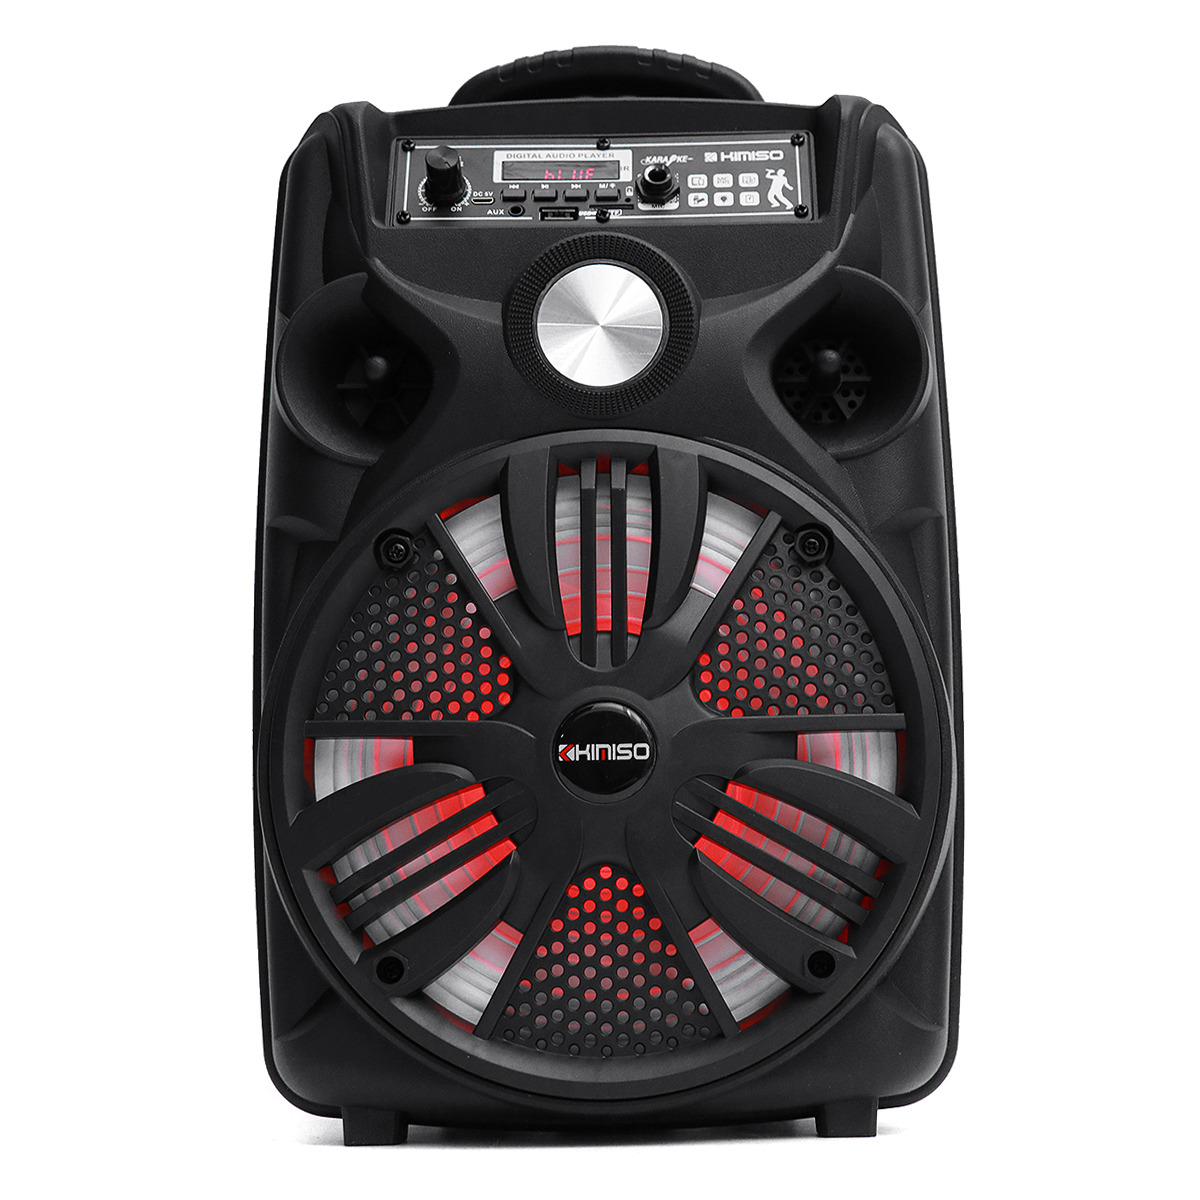 QS-825-8-Inch-LED-Display-Portable-bluetooth-50-Wireless-Speaker-Loud-Outdoor-Wired-Microphone-with--1888597-5